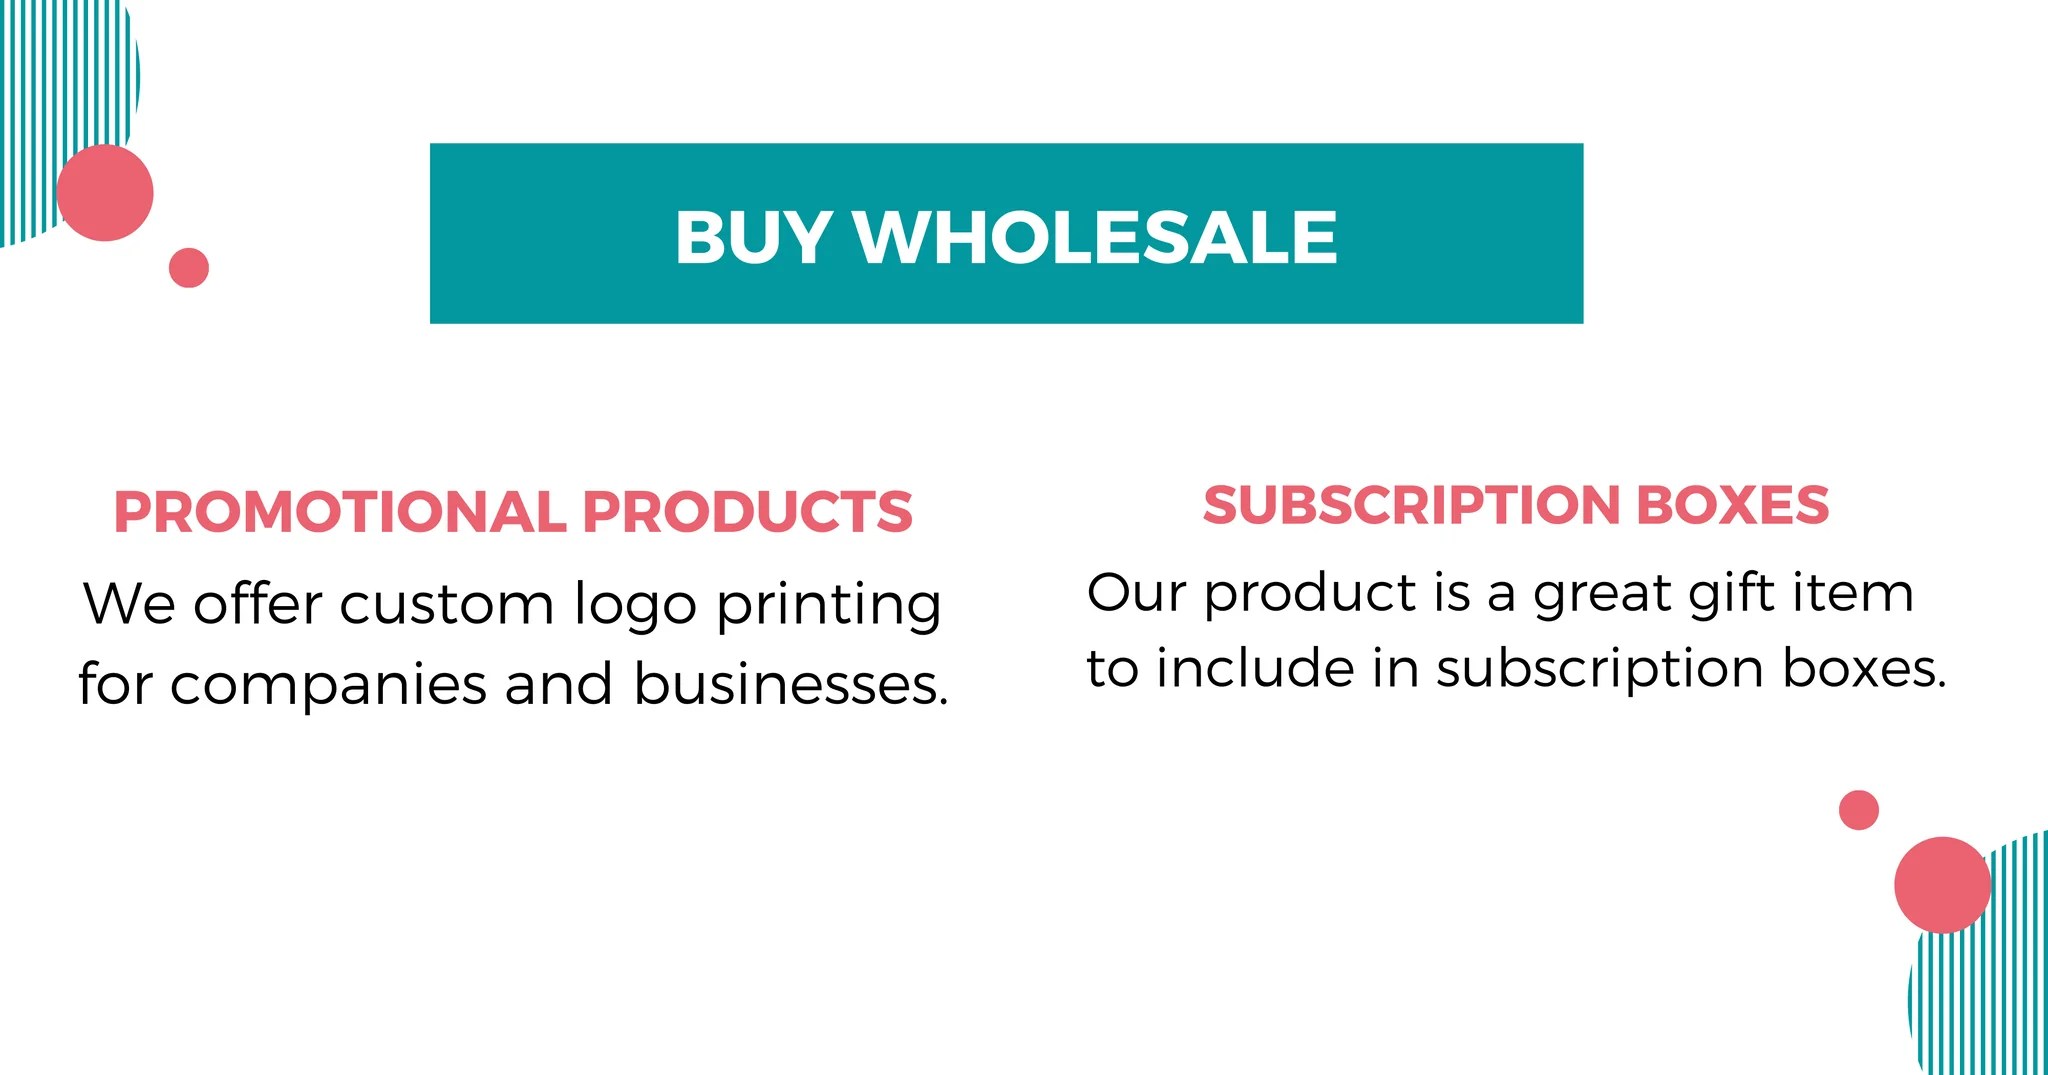 Where Do Wholesalers Buy Their Products